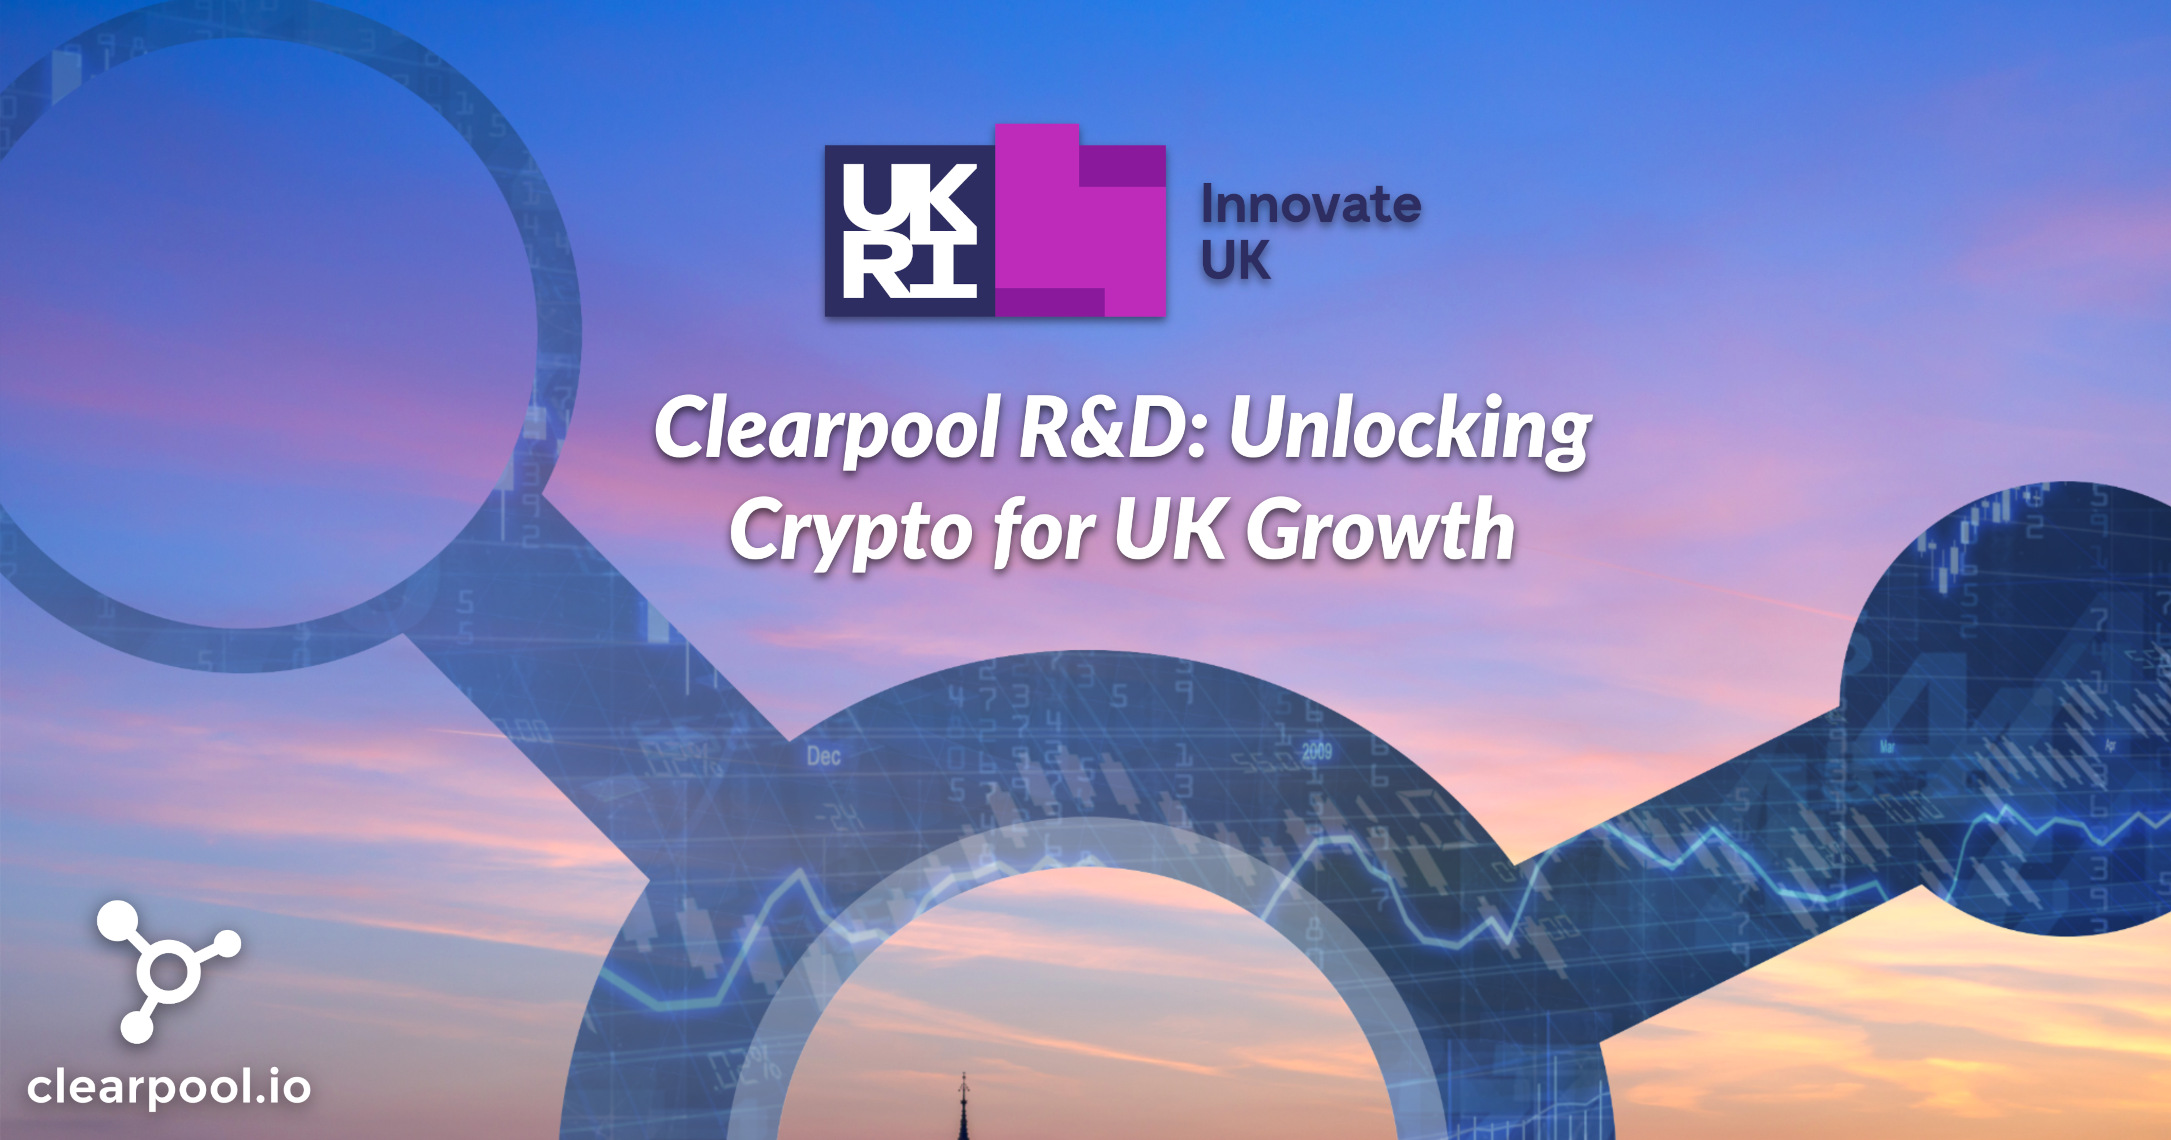 Clearpool awarded UK Funding to Drive Growth of Crypto Markets